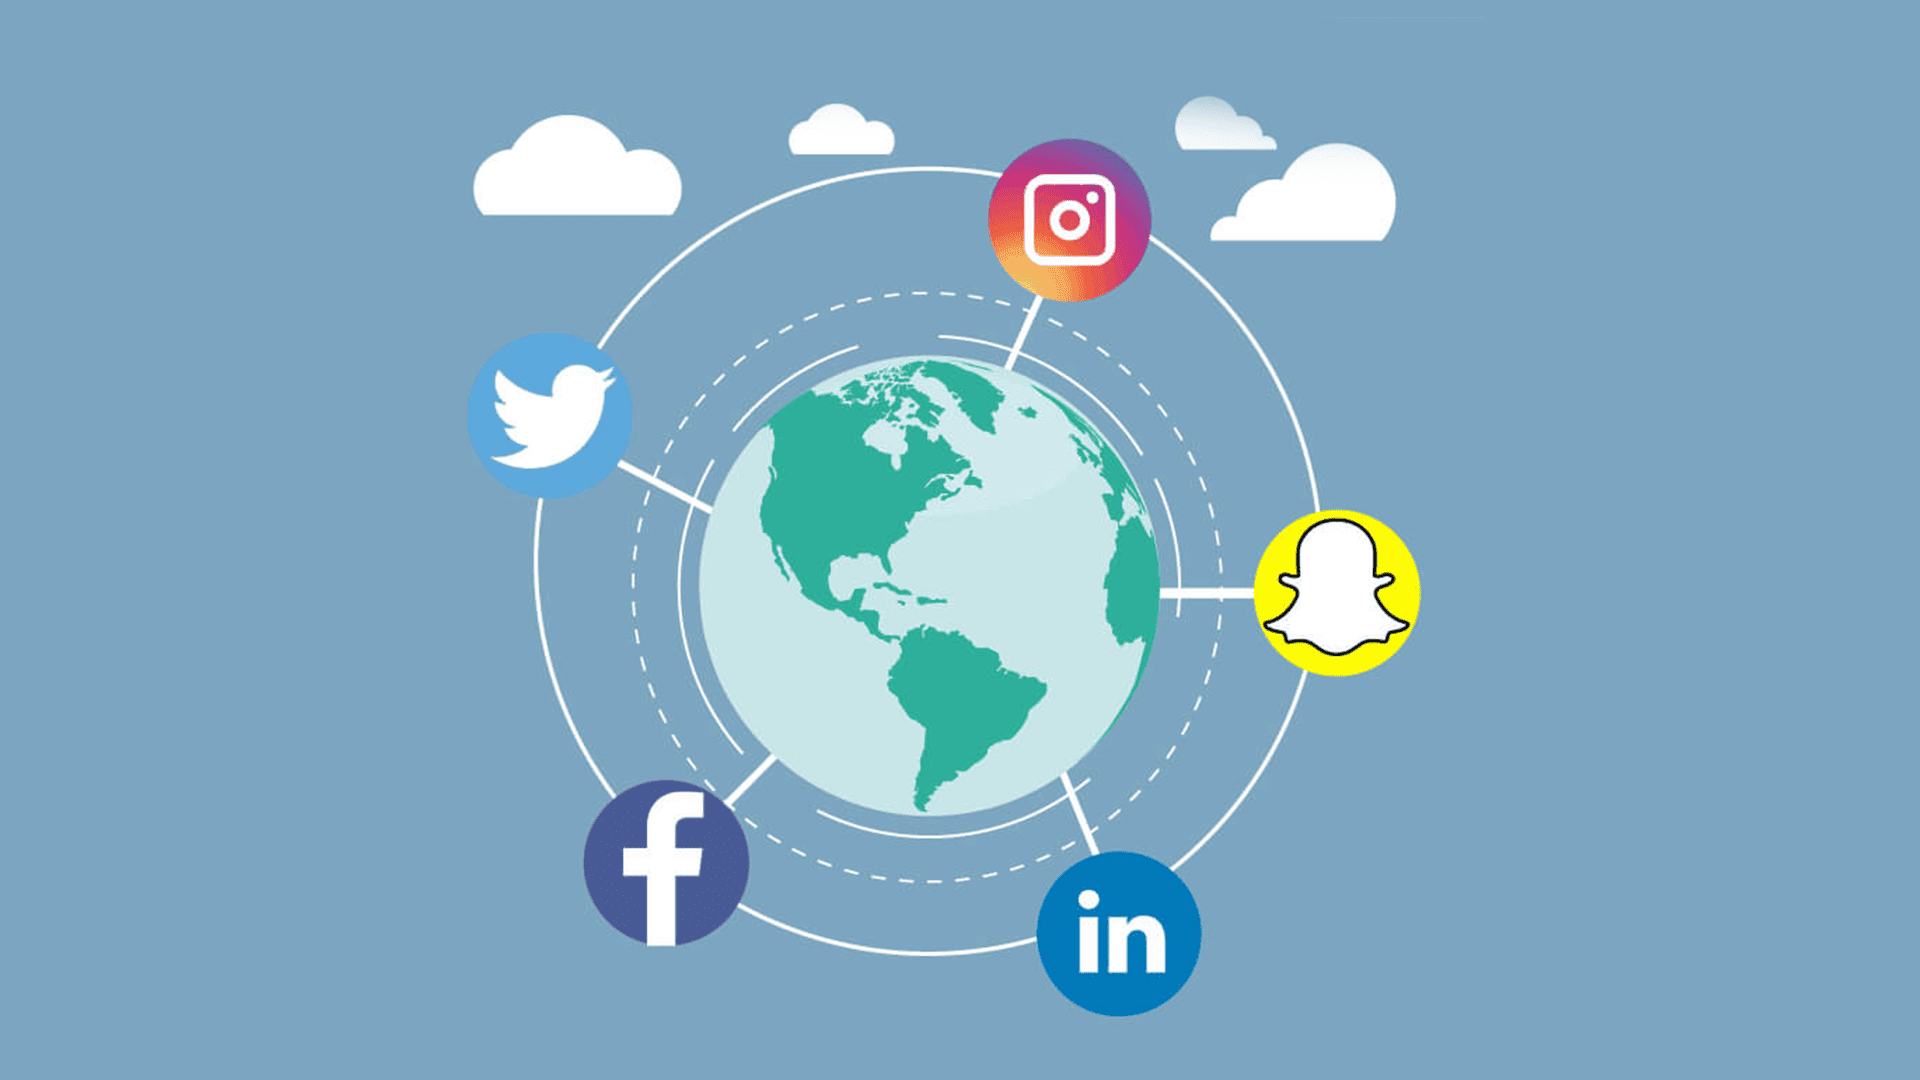 a globe with social media icons: Facebook, LinkedIn, Snapchat, Instagram, Twitter around it